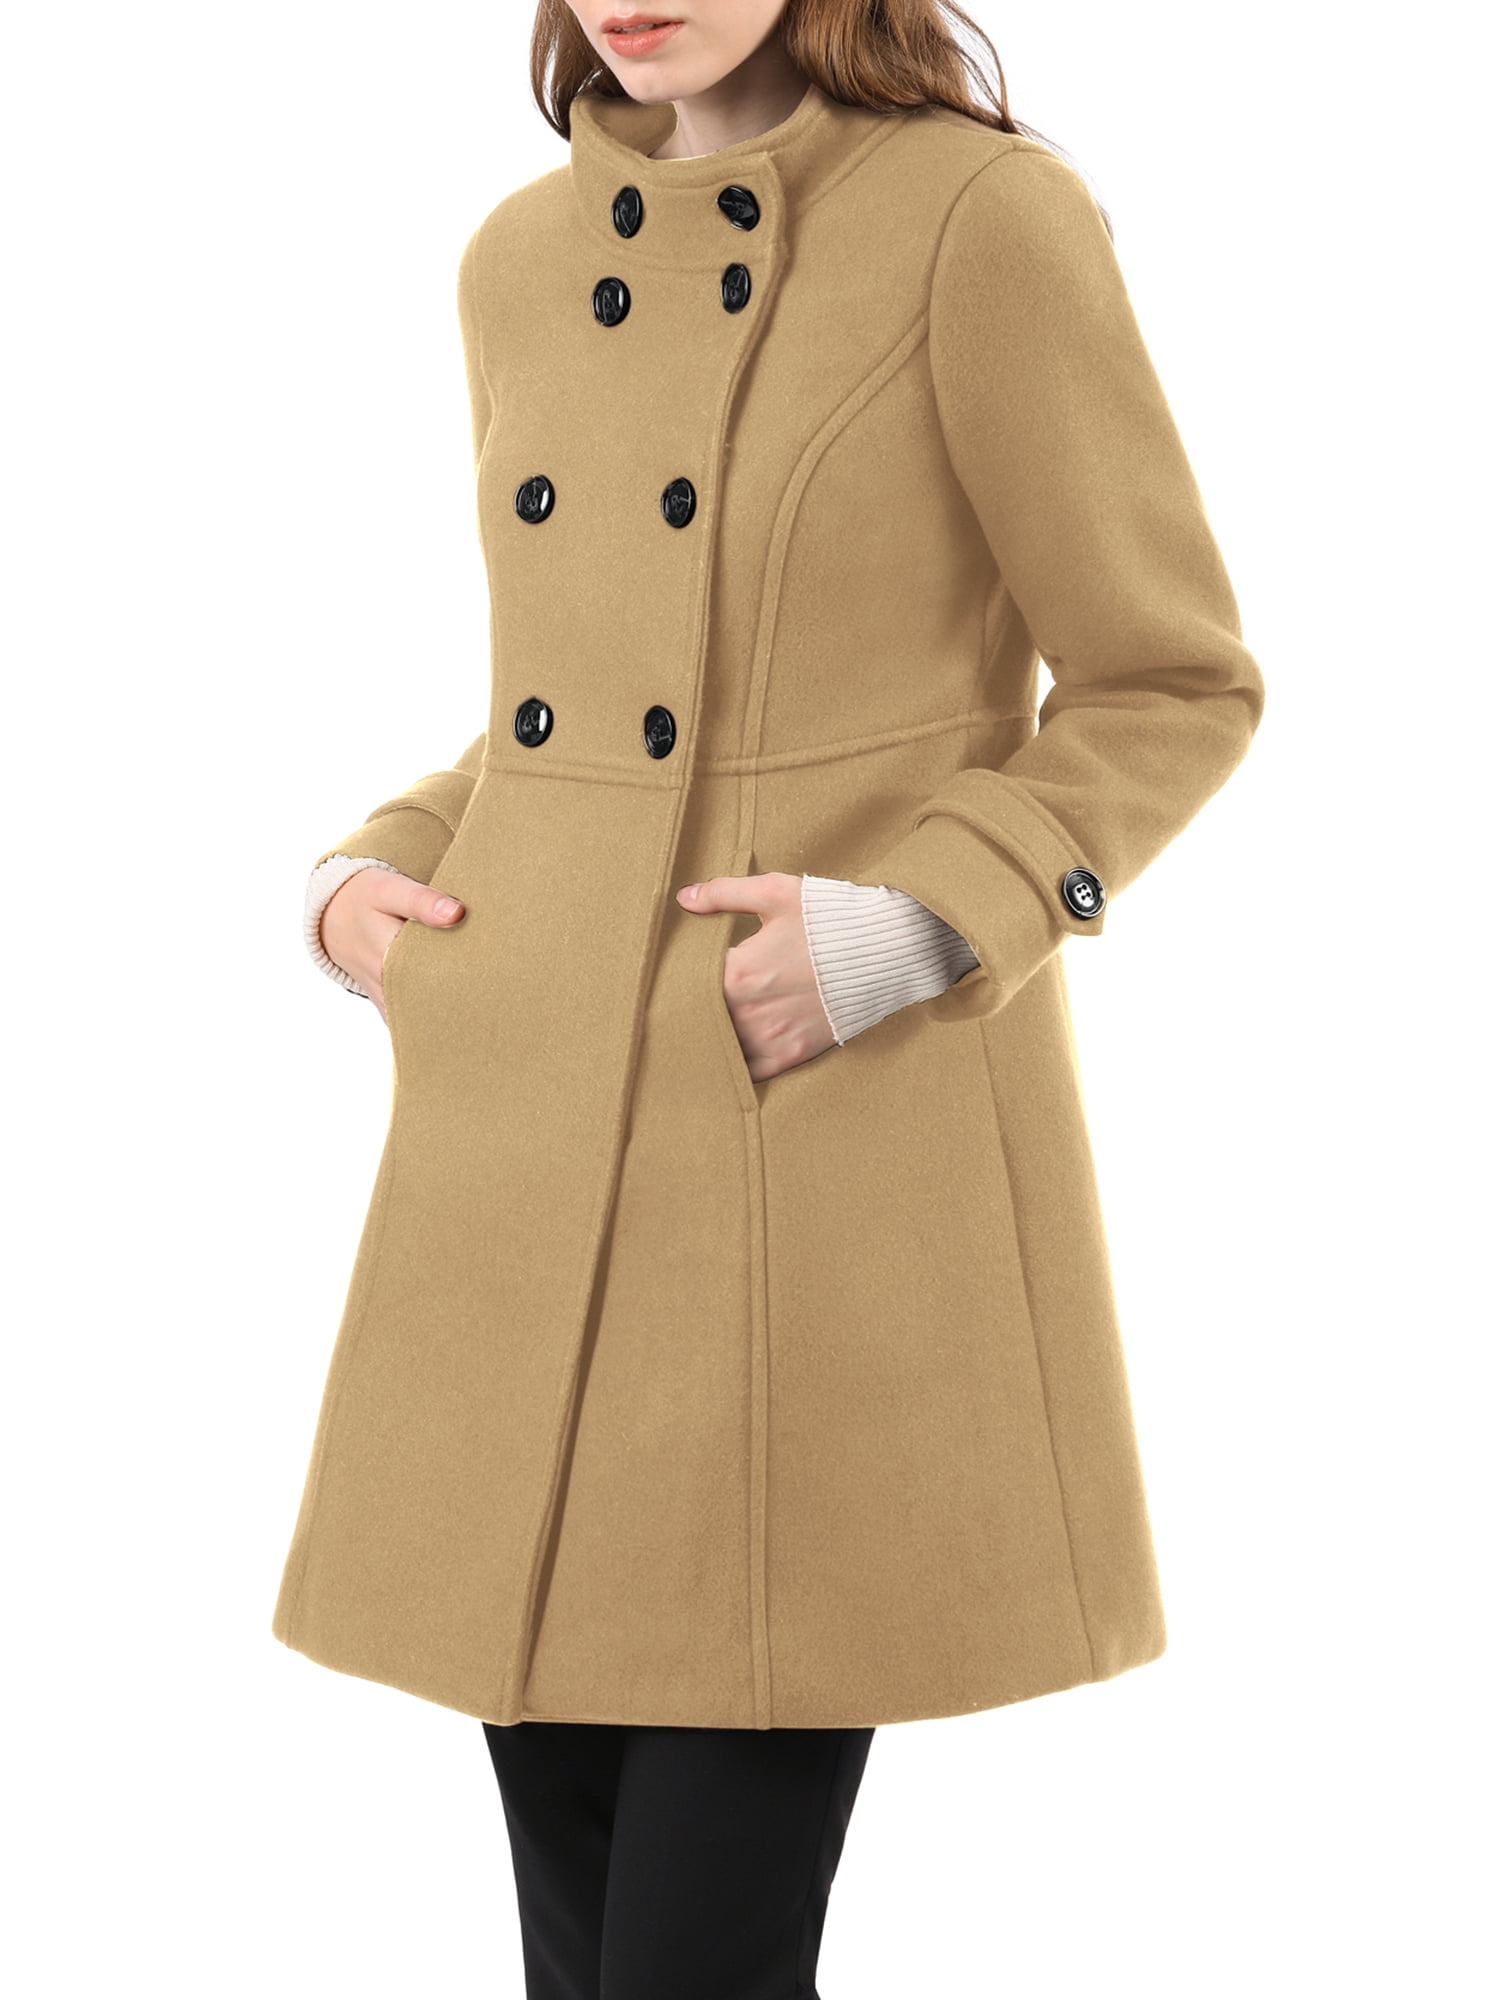 Allegra K Women's Long Sleeves Double Breasted Button Winter Outerwear Pea Coat 